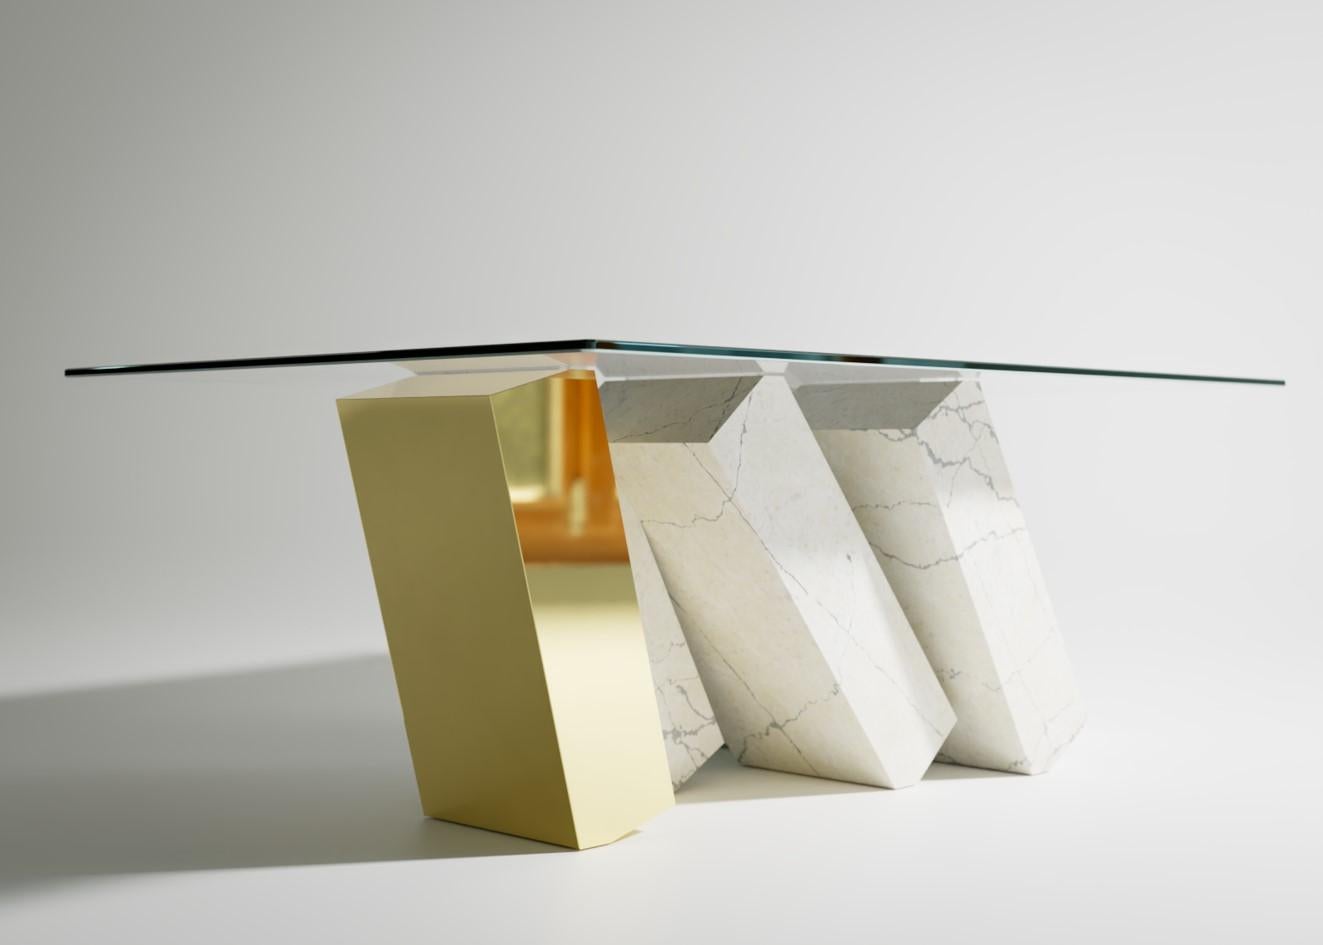 The Megalith coffee table is a striking new addition to the Megalith collection; a dazzling piece of modern furniture from Christopher Duffy, and luxurious addition to the living space.

A glass tabletop balances across a series of six toppling